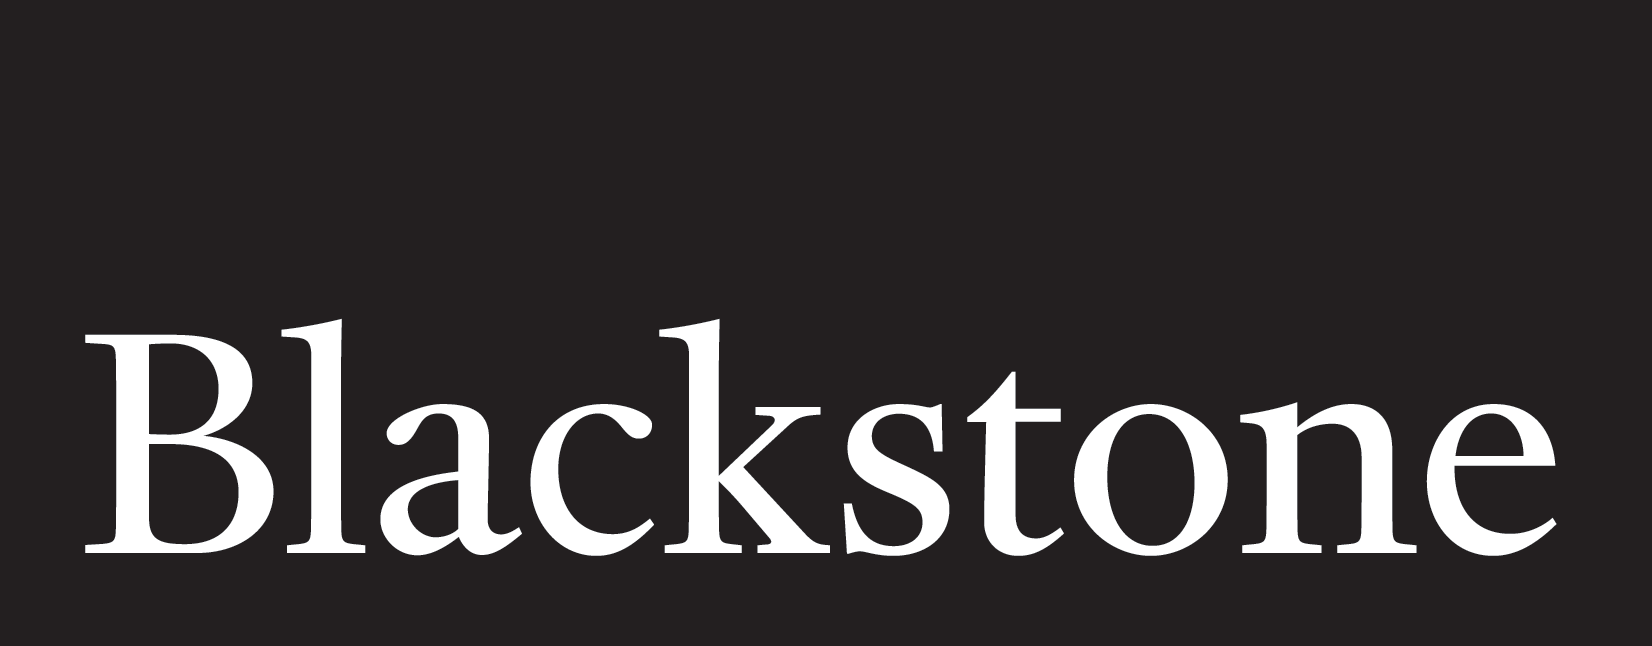 Our People Blackstone